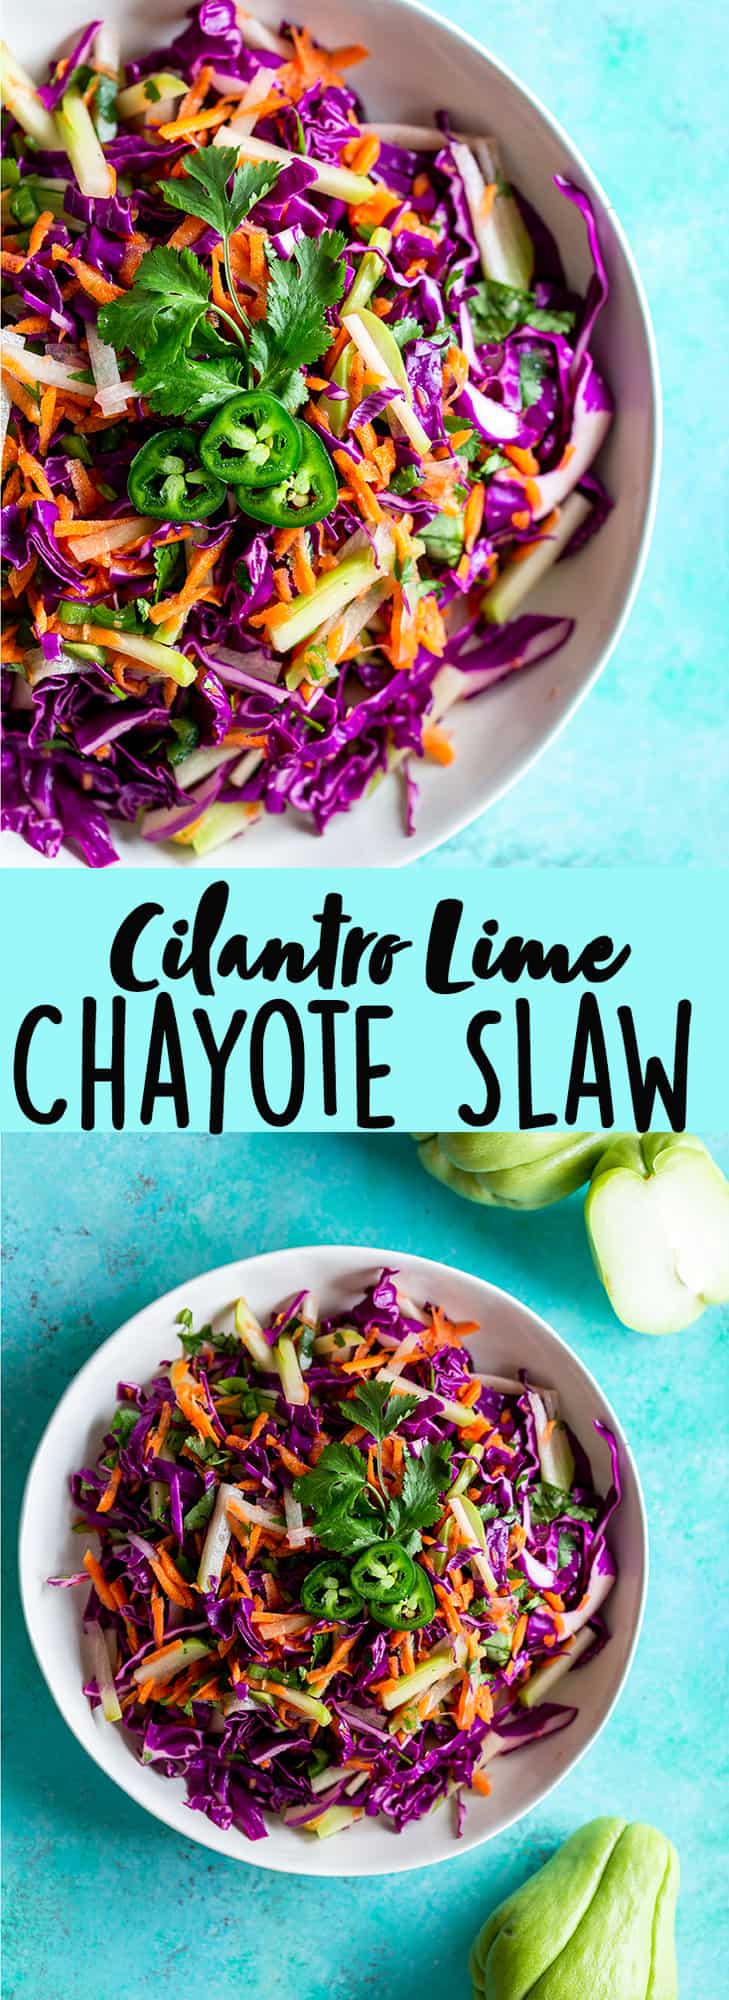 Chayote Recipe - Cilantro Lime Chayote Slaw is crunchy and vibrant.  Using chayote squash, cabbage, carrots and jalapeno this slaw is perfect for tacos. It also makes a great light and healthy side dish for any dinner! Healthy recipe | Taco Slaw | Cabbage recipe | Low fat | Low Carb | Low Calorie | health benefits of chayote | What is chayote | How to cook chayote | Chayote recipes | Mexican Recipes | What to serve with tacos 